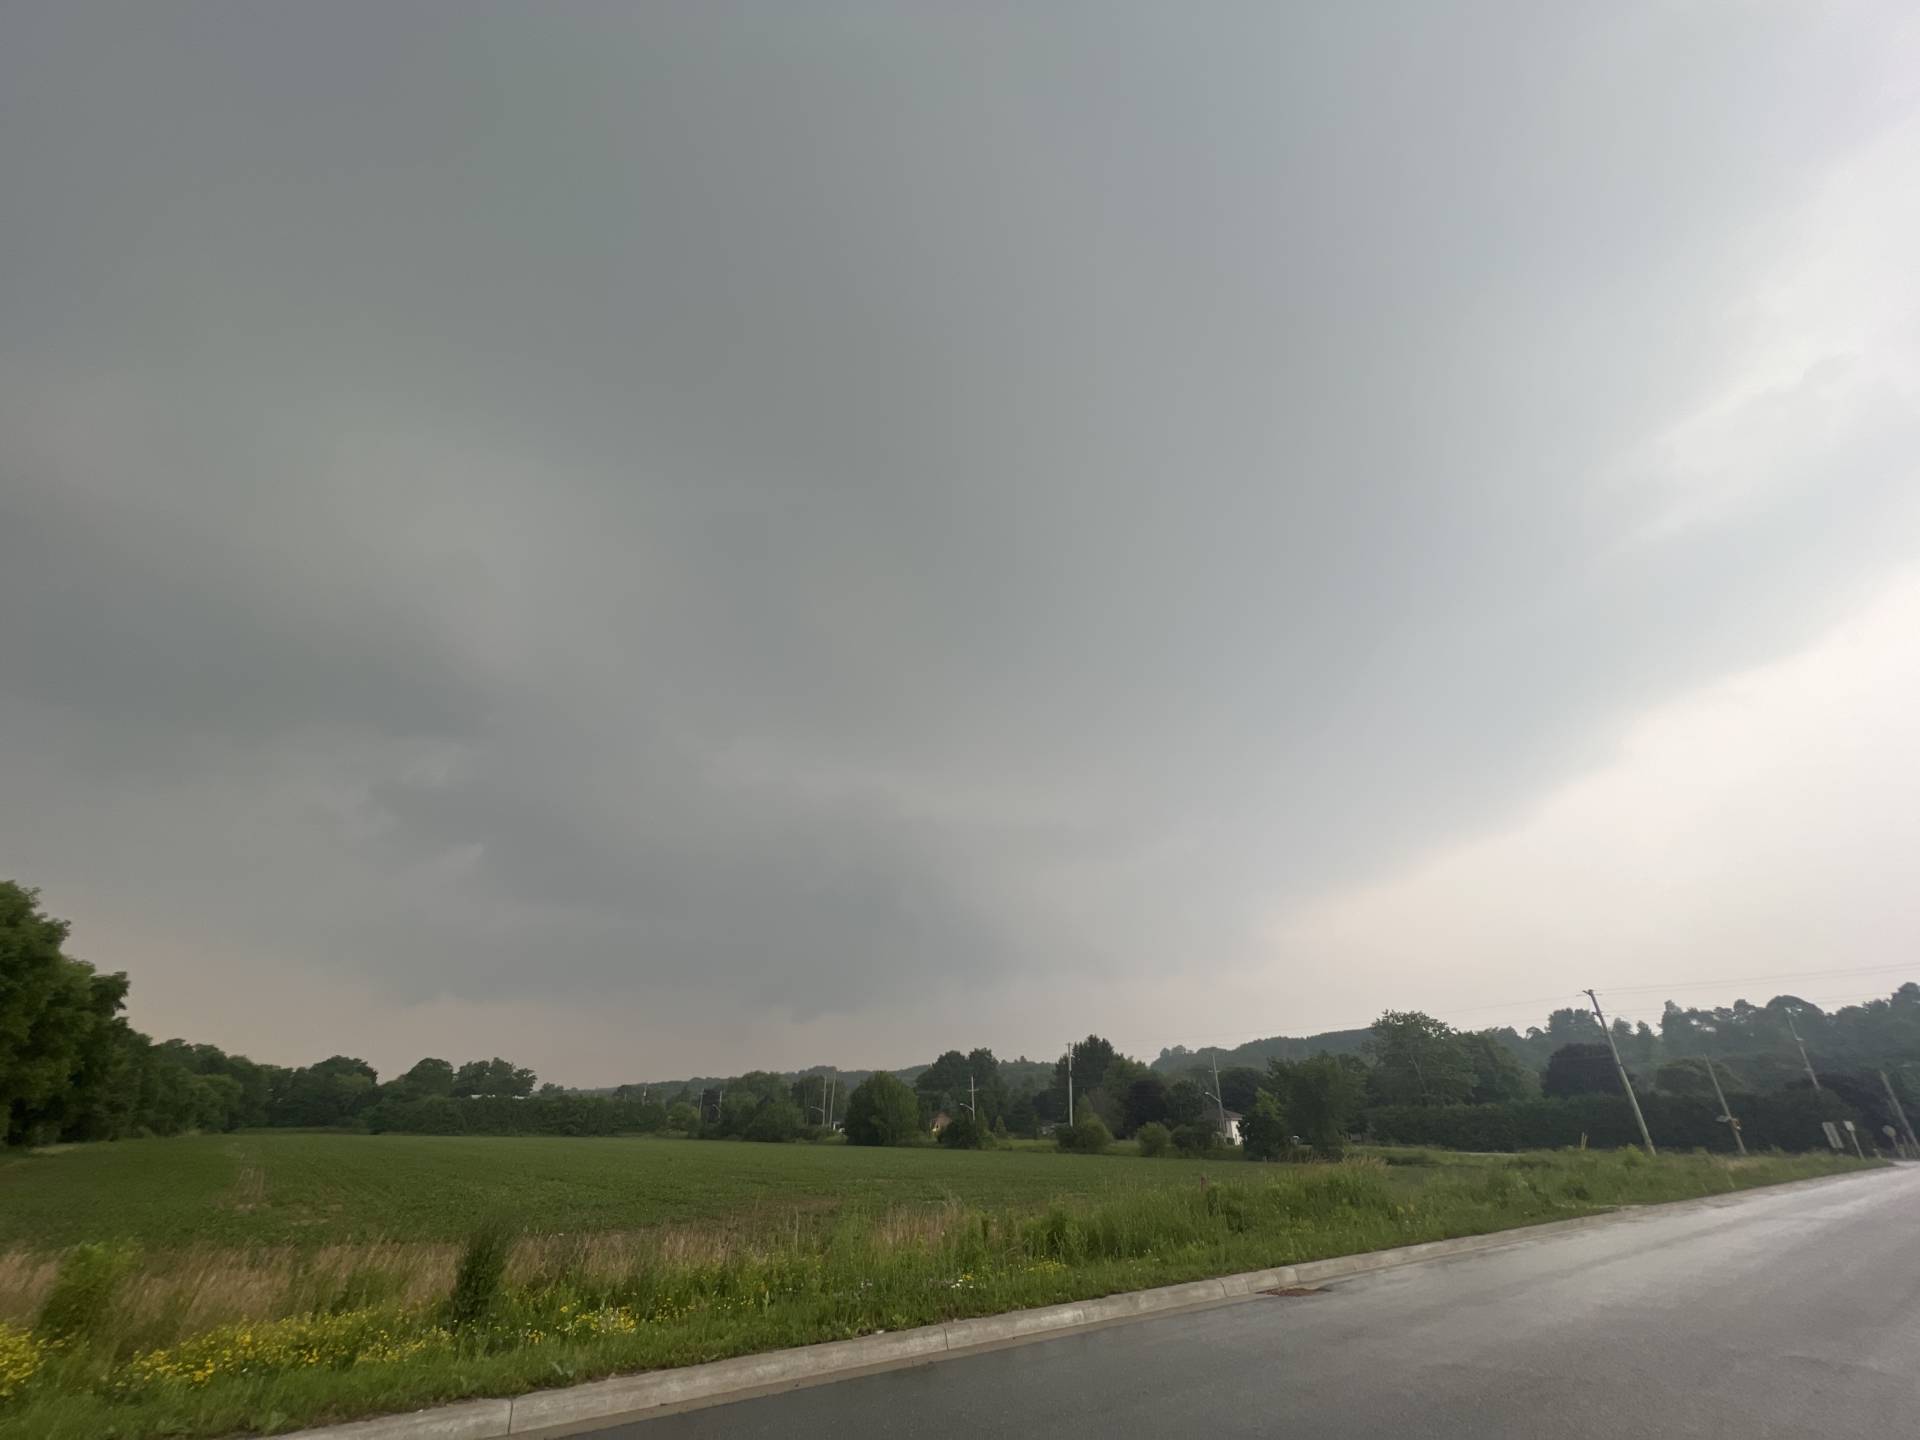 Supercell coming into Creemore 06:35 PM #ONstorm ⚡️